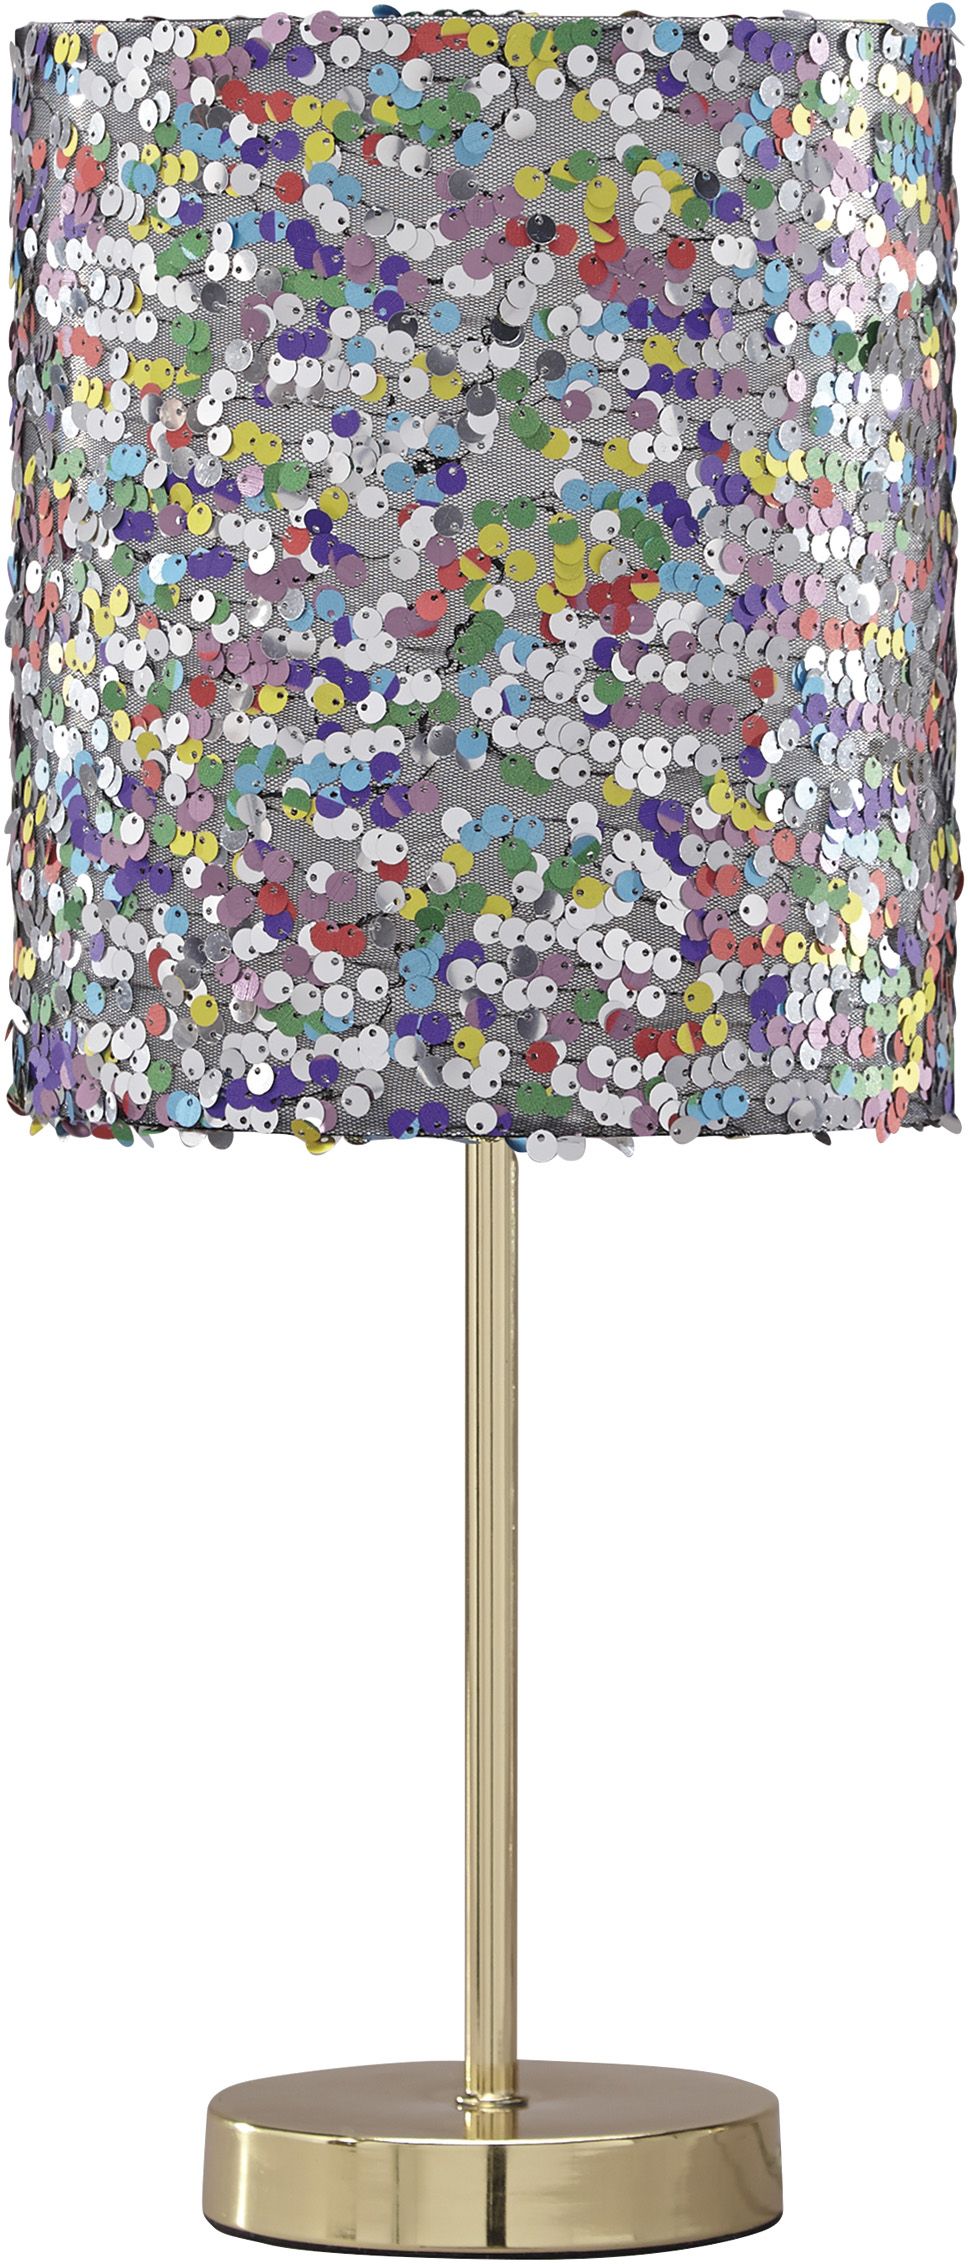 Signature Design by Ashley® Maddy Multi Table Lamp